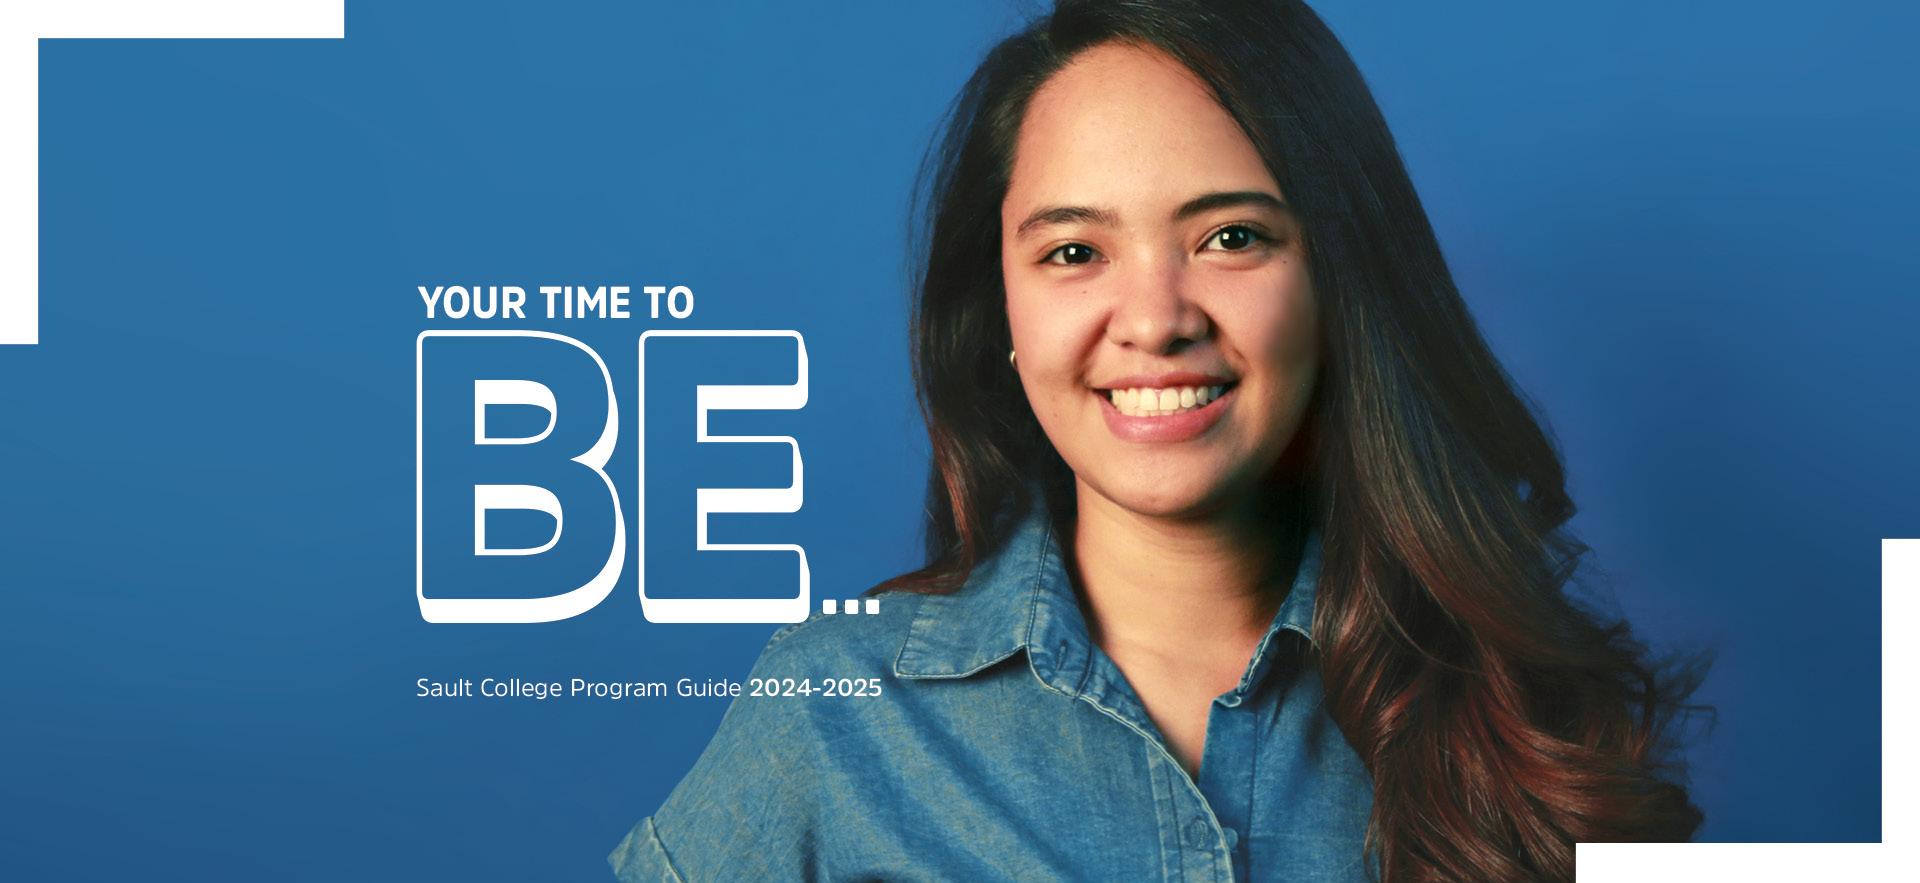 Female student in blue shirt smiling with blue background and text overlay "your time to BE..." for ϲͼȫ Program Guide for 2024-25